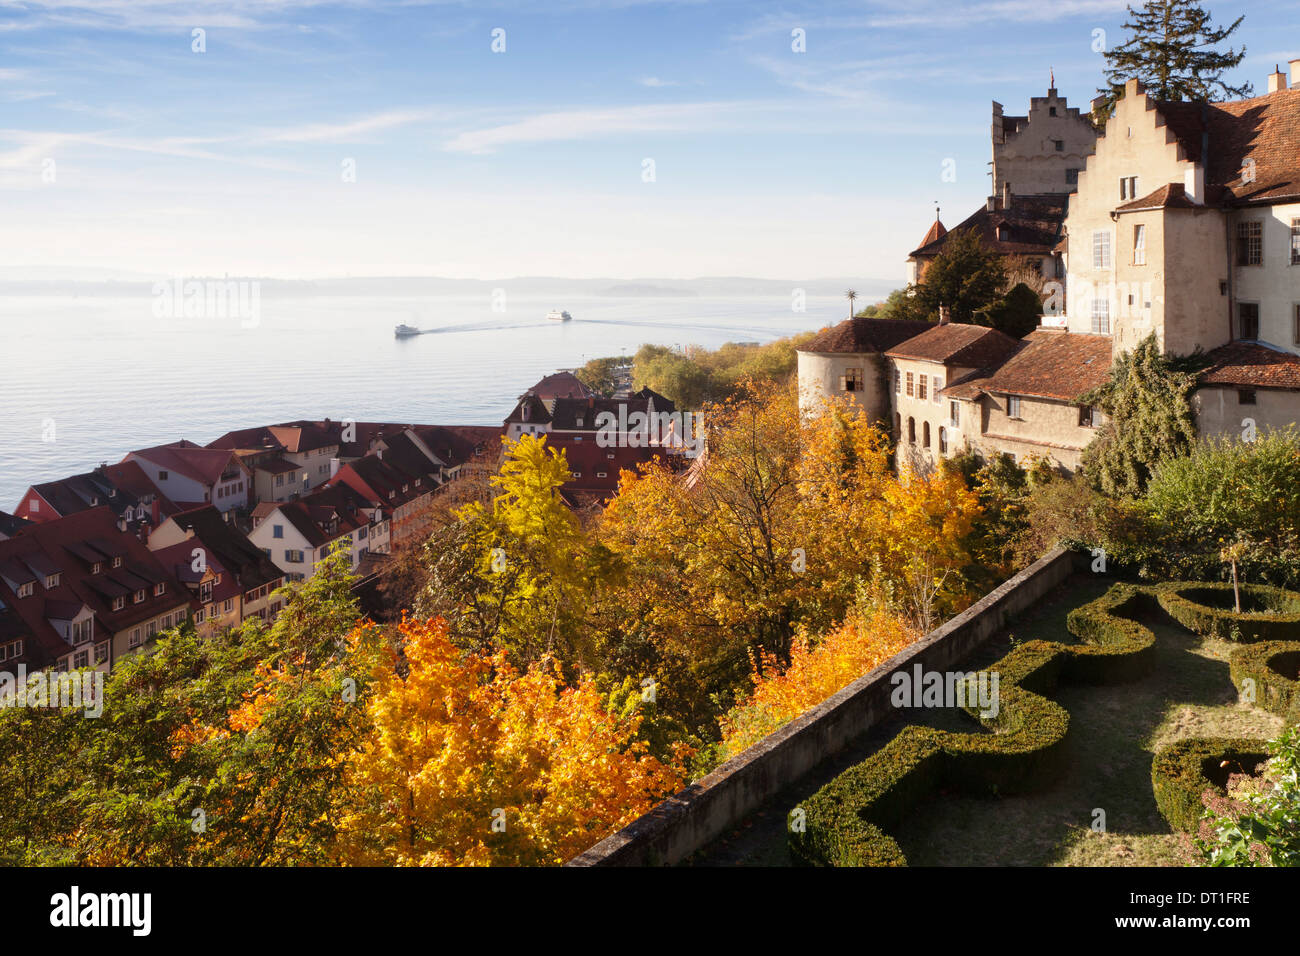 View from the terrace of the New Castle to the Old Castle and Lake Constance, Meersburg, Baden Wurttemberg, Germany Stock Photo